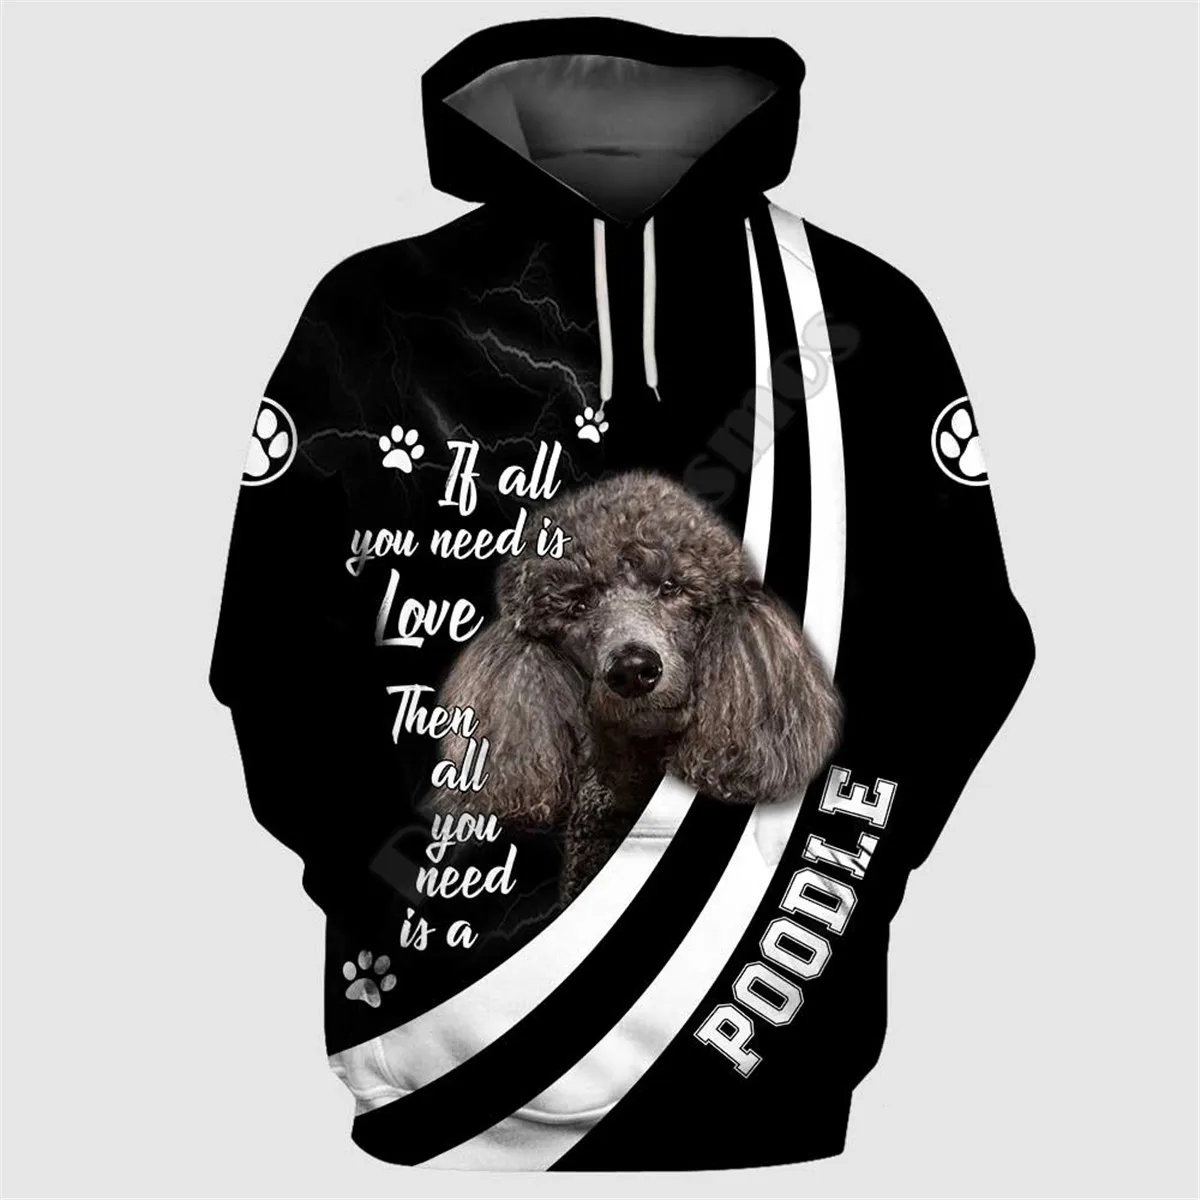 Poodle 3D Printed Hoodies Funny Pullover Men For Women Funny Sweatshirts Animal Sweater Drop Shipping 09 men tracksuits winter hoodies women fashion hoodie jogger pants set woman 2 pieces summer y2k clothes sportswear drop shipping